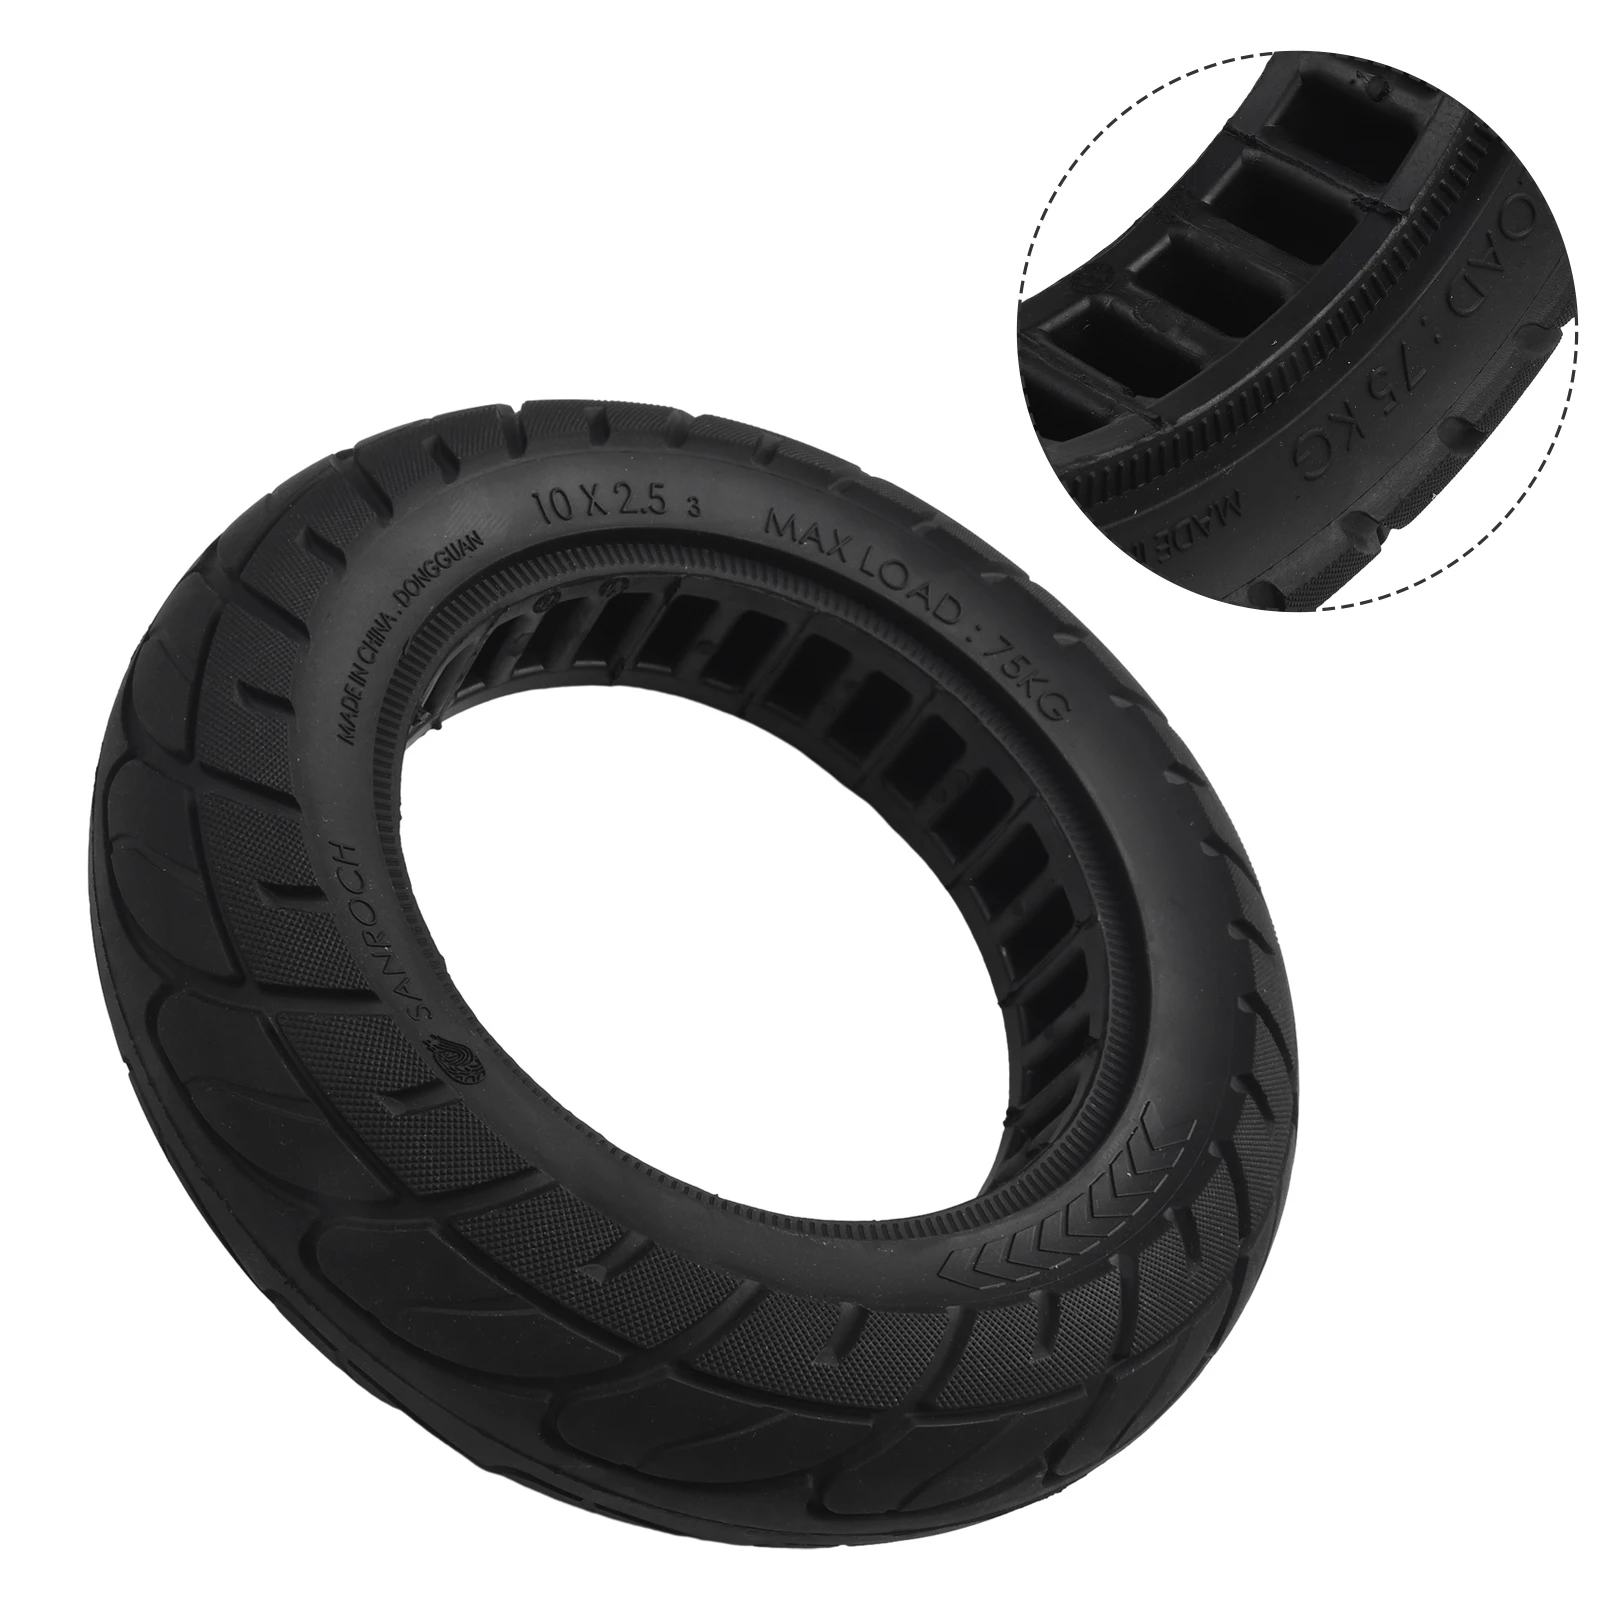 

Durable High Quality Outdoor Sports Scooters Tire Solid Tyre 63MM Accessories Inflatable Rubber 10 Inch 1180g Weight